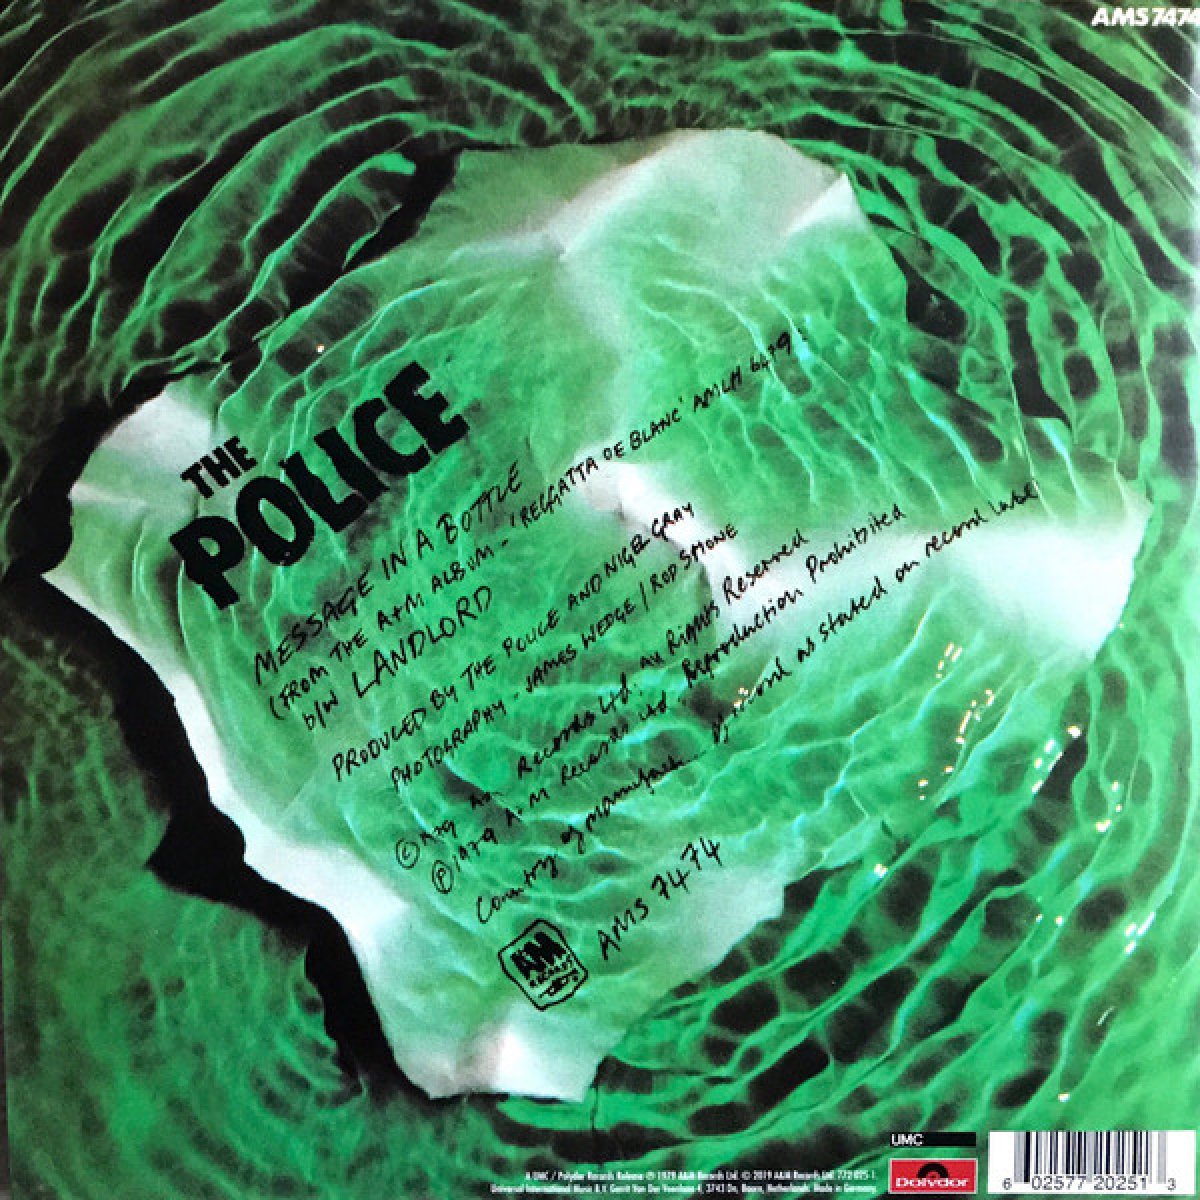 The Police "Message In The Botle" 2X7" RSD